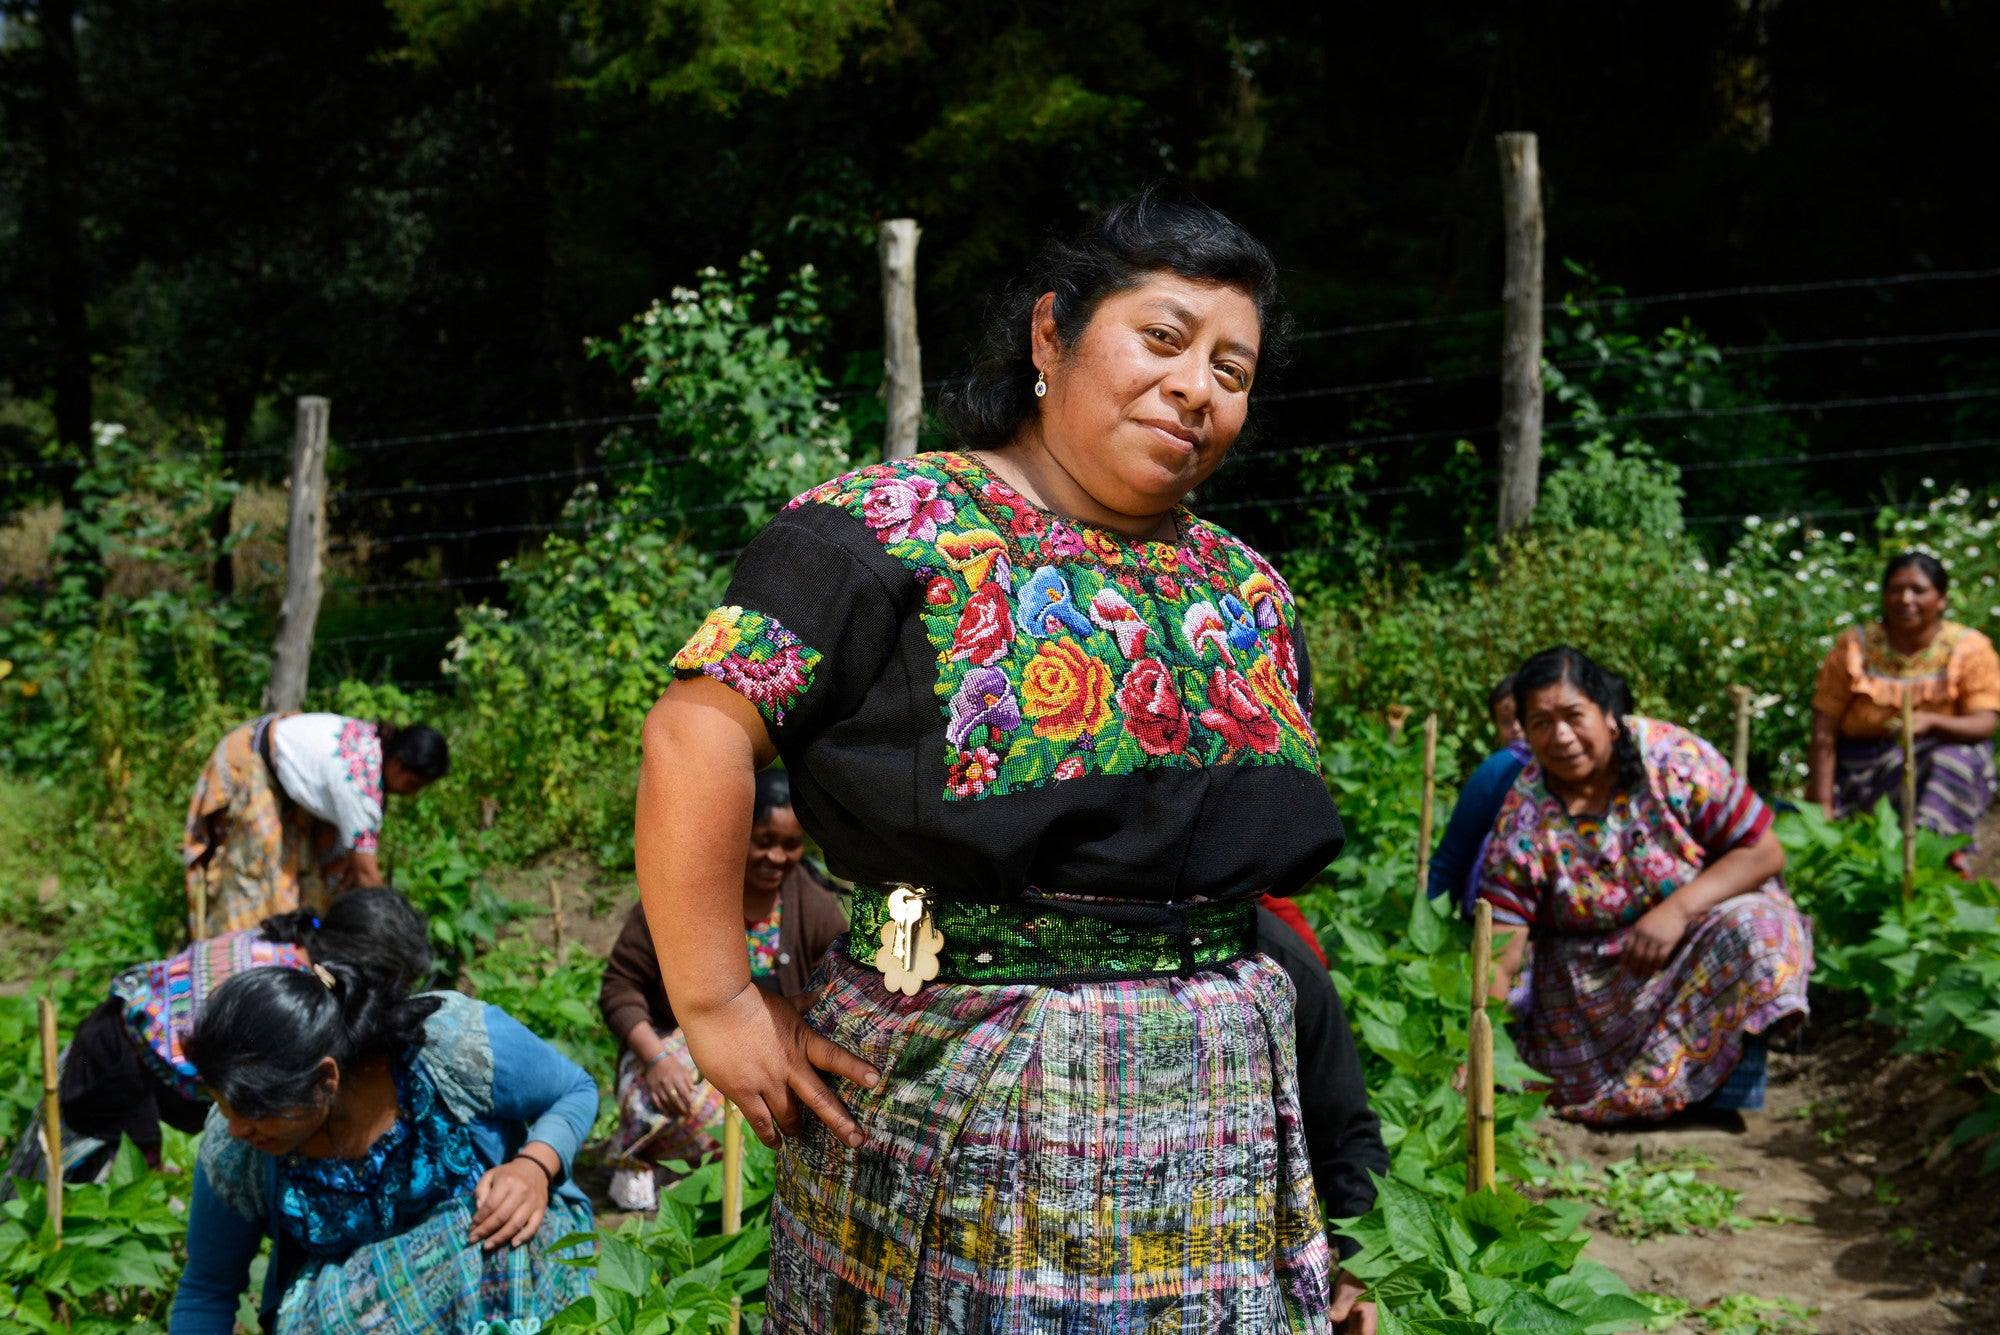 This is María Elena Juárez Bal, mother of 4 sons and 1 daugther, she produces tomatoes and green beans.